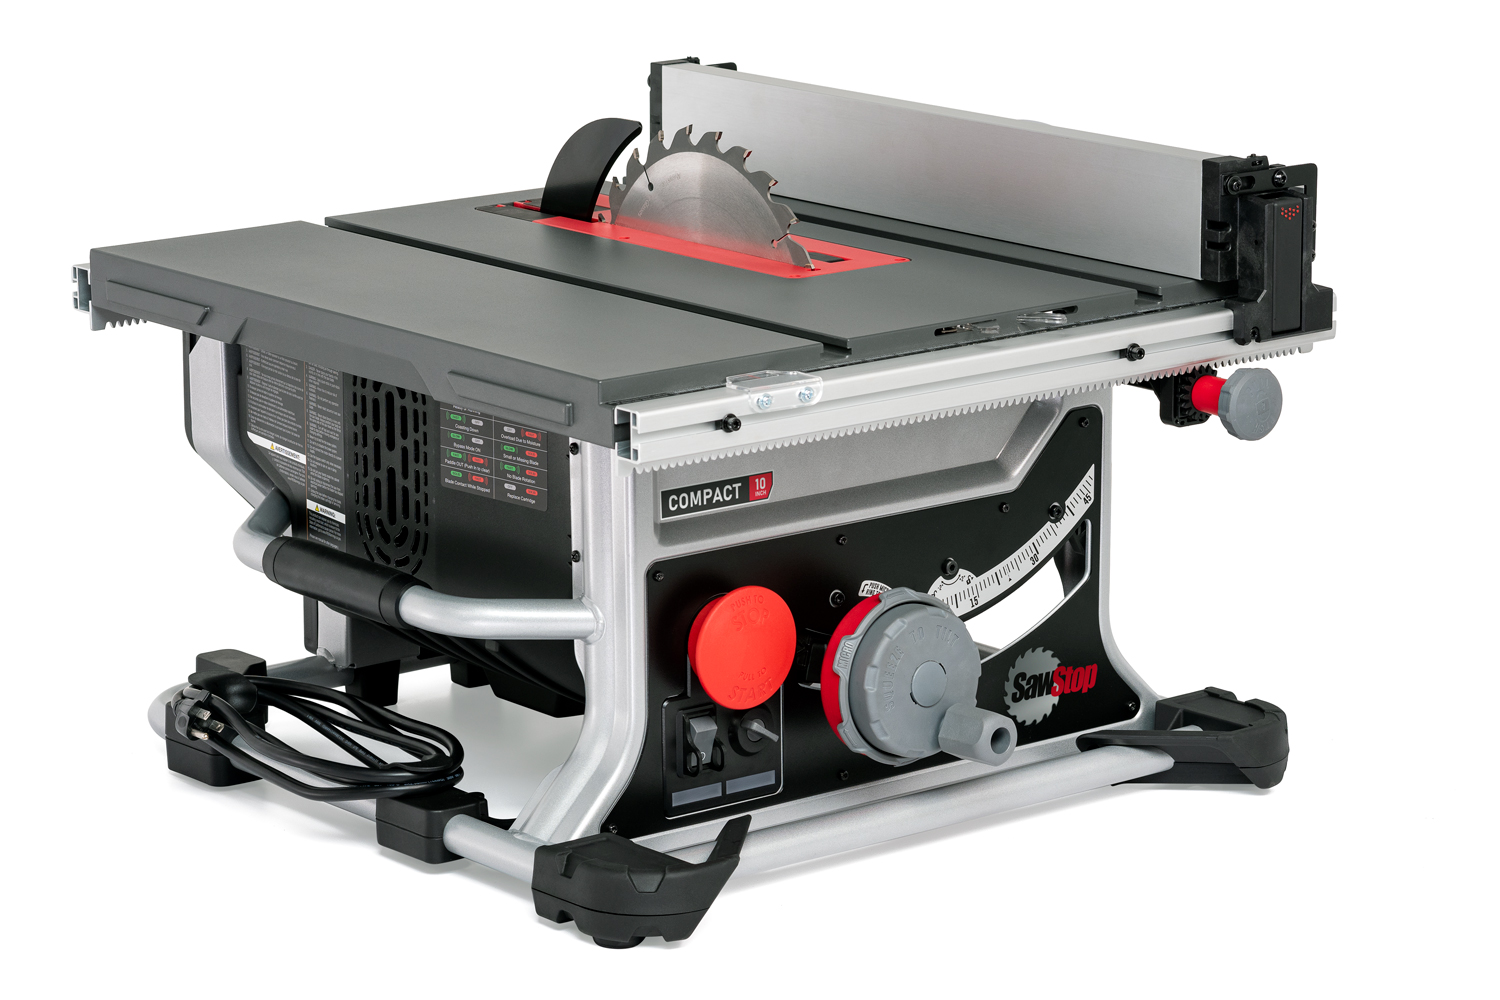 Sawstop CTS-120A60 Compact Table Saw Image